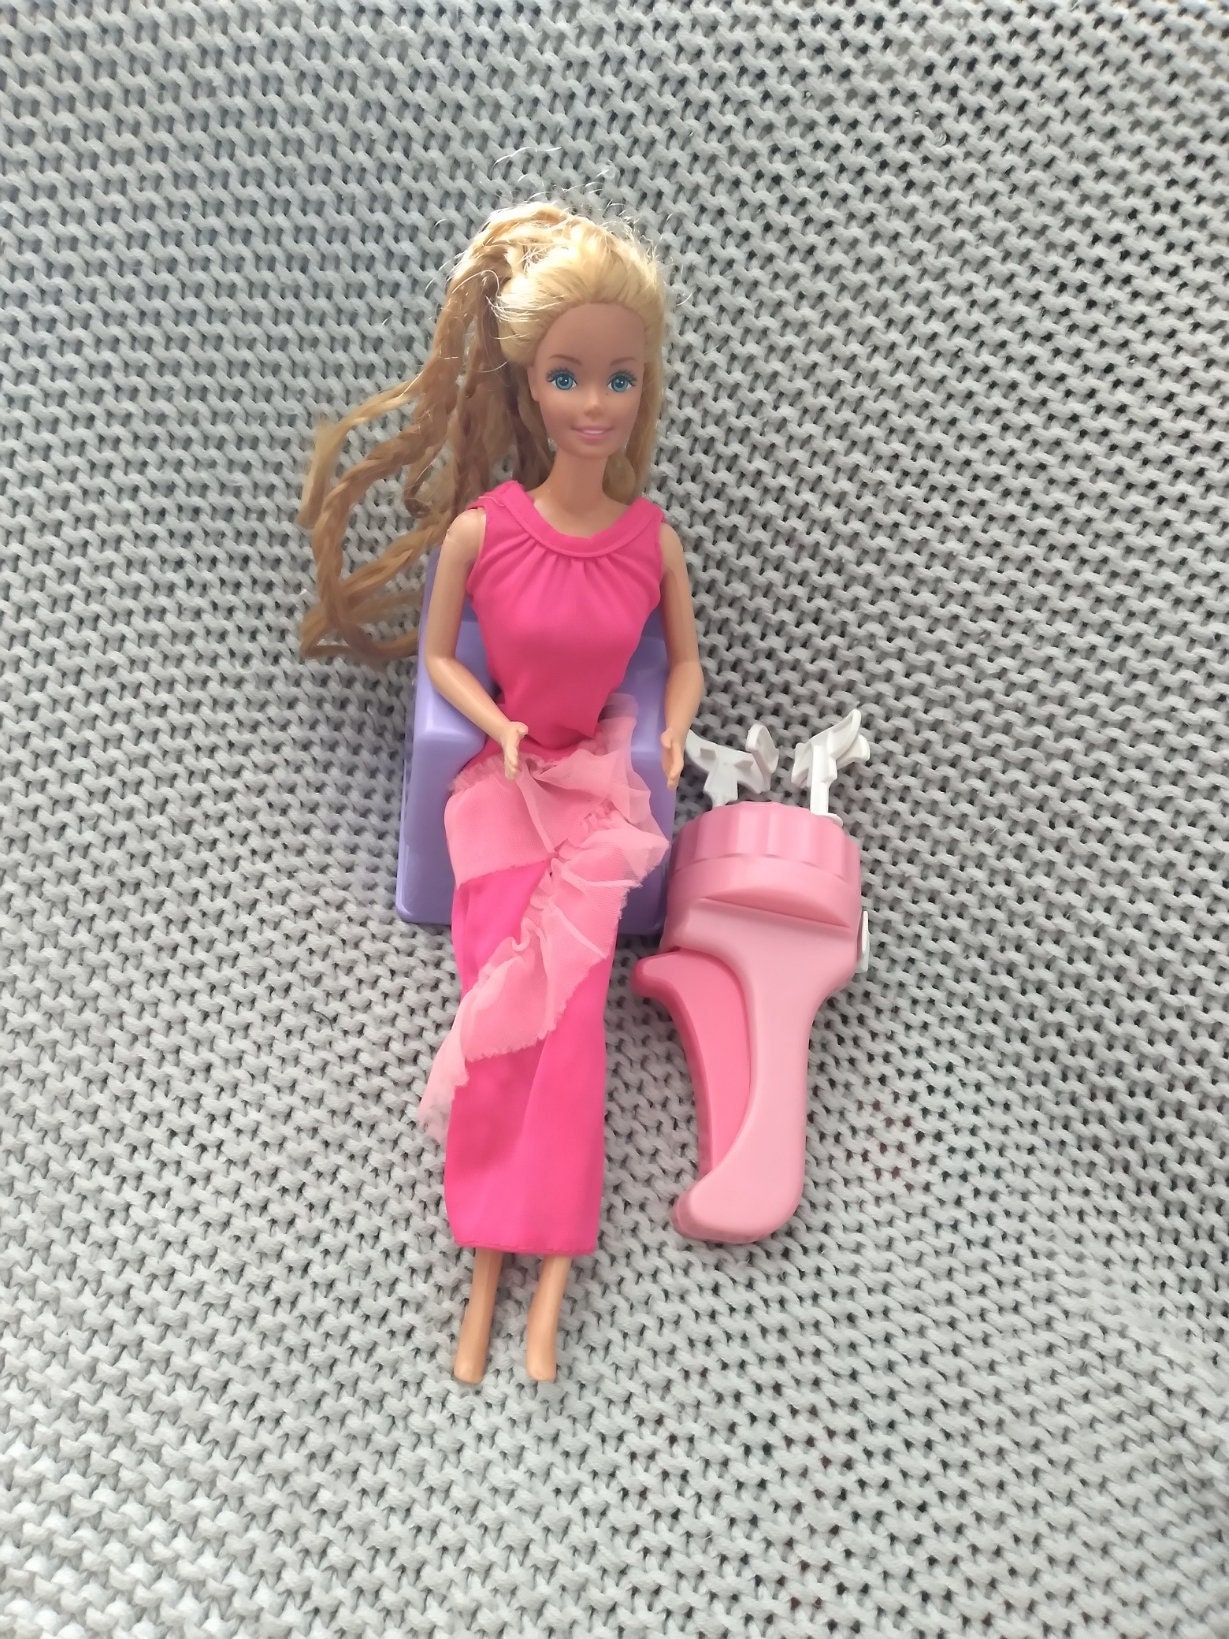 Barbie Interior Designer Fashion Doll with Blonde Hair & Prosthetic Leg,  Pink Dress & Houndstooth Jacket, Accessories